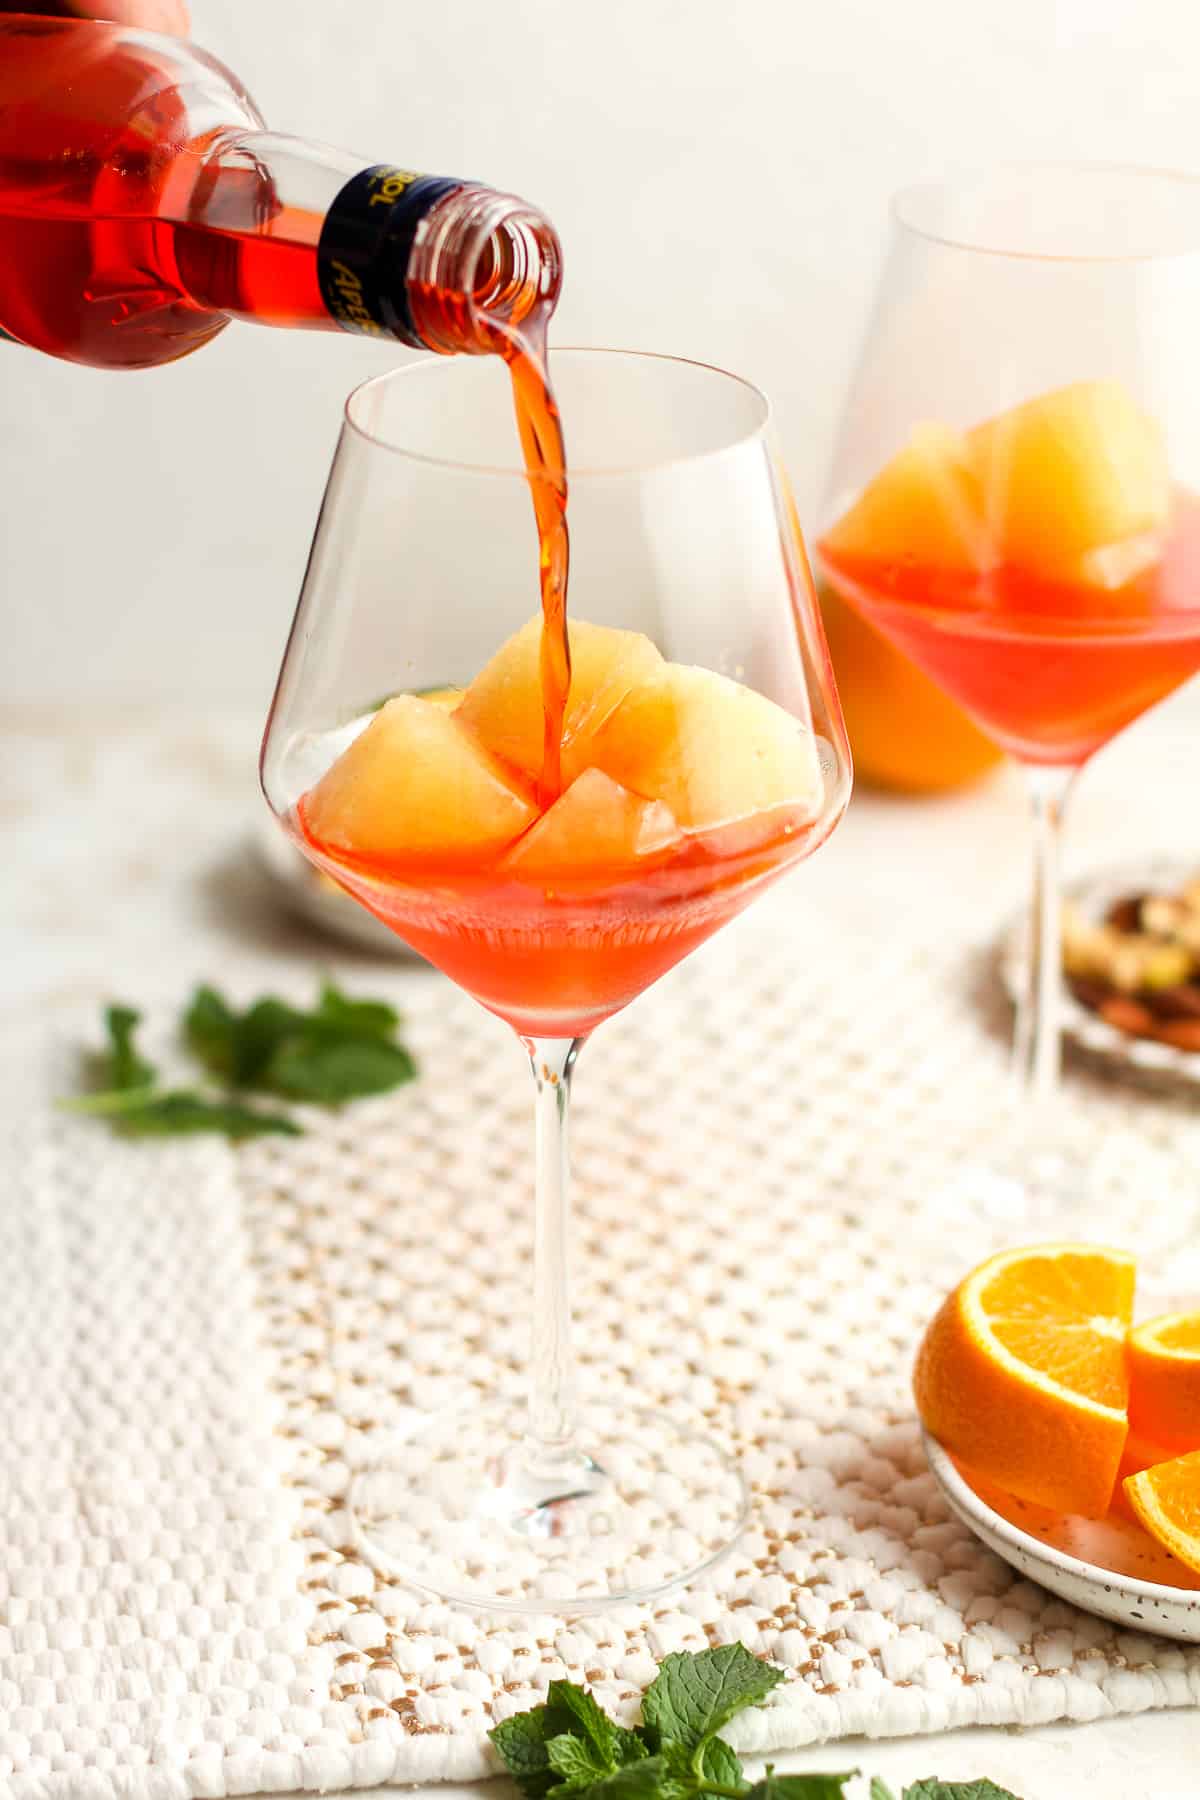 A bottle of aperol being poured into a wine glass with orange ice cubes.